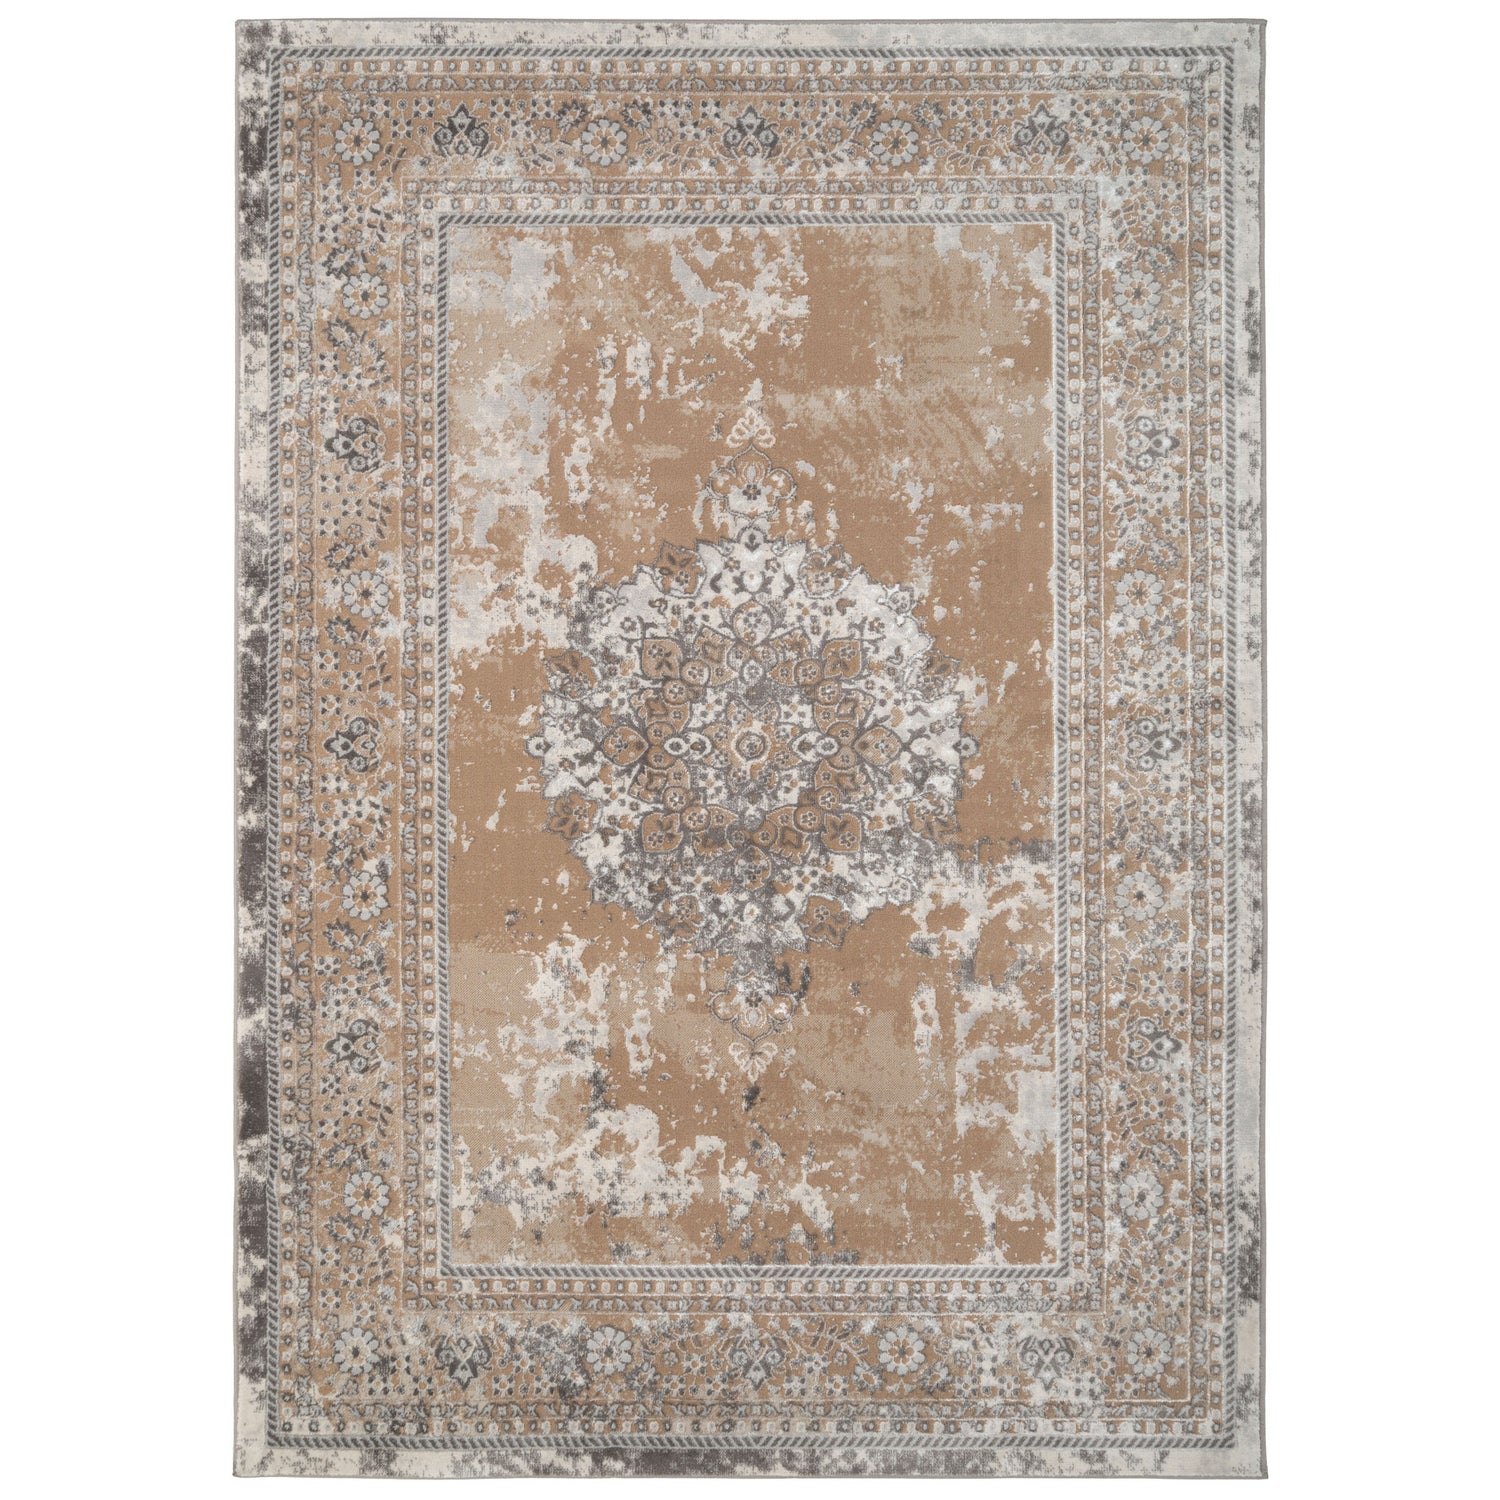 Traditional Distressed Beige Area Rug